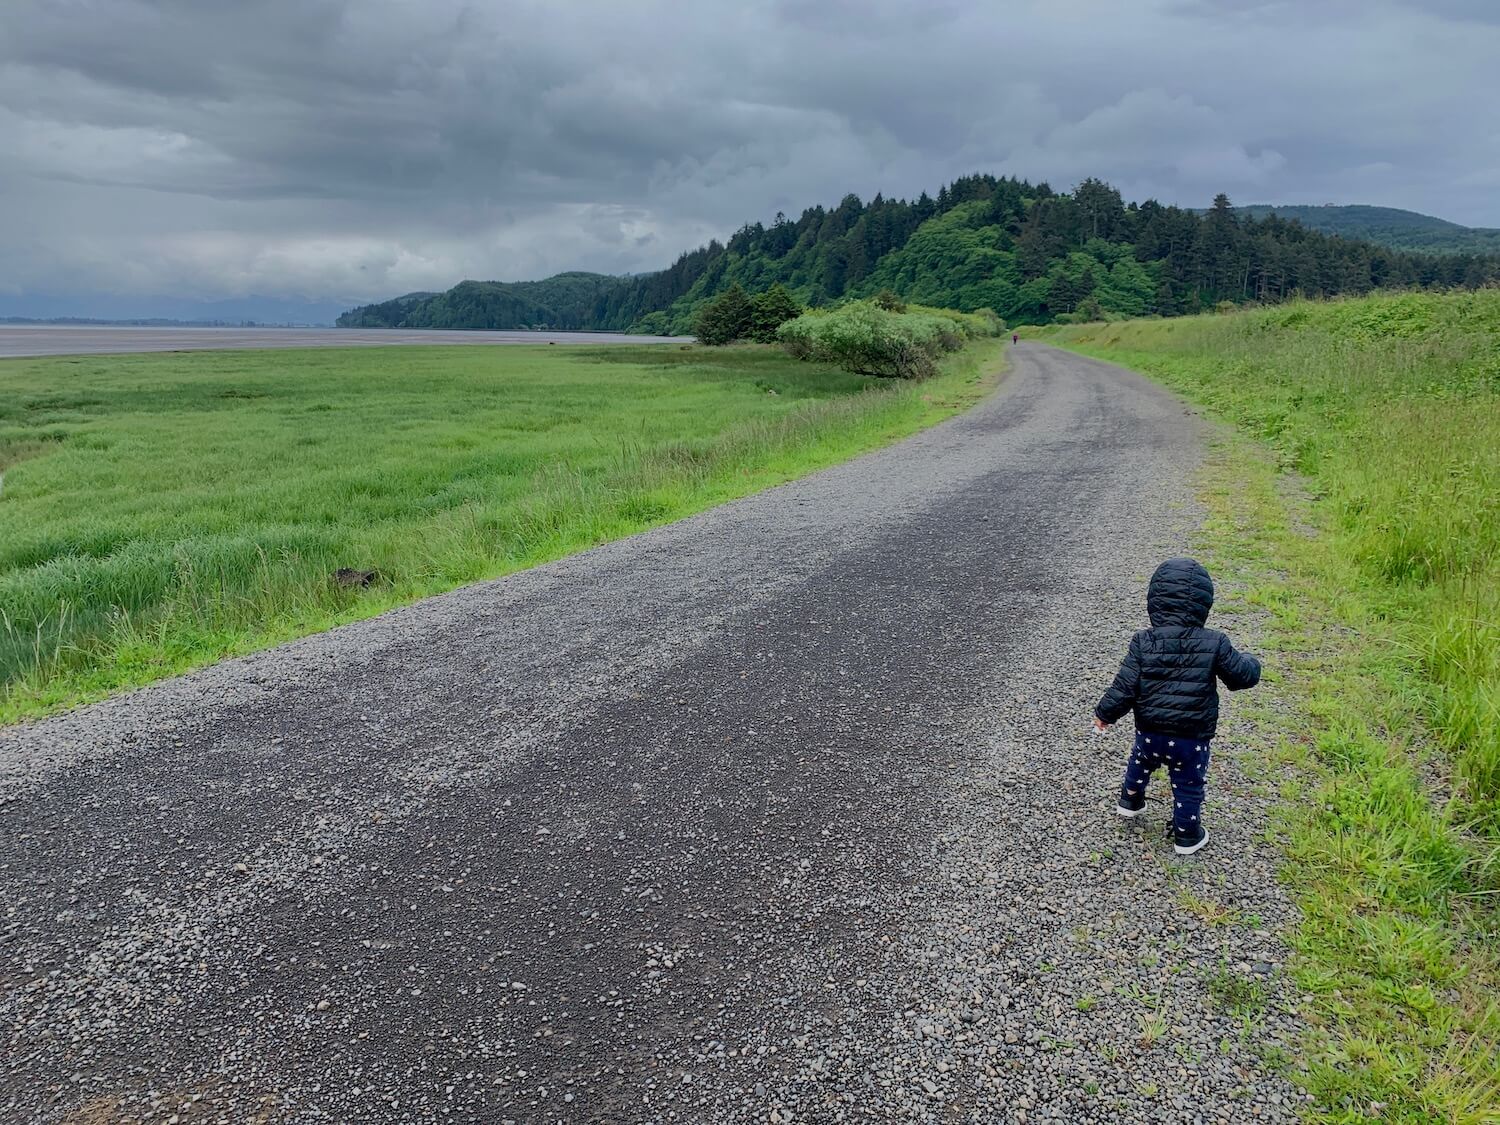 Bayocean is a peaceful spit of land between the Pacific Ocean and Tillamook Bay. The coastal colors are alive with bright greens and the gray clouds and gravel road add contrast to this photo.